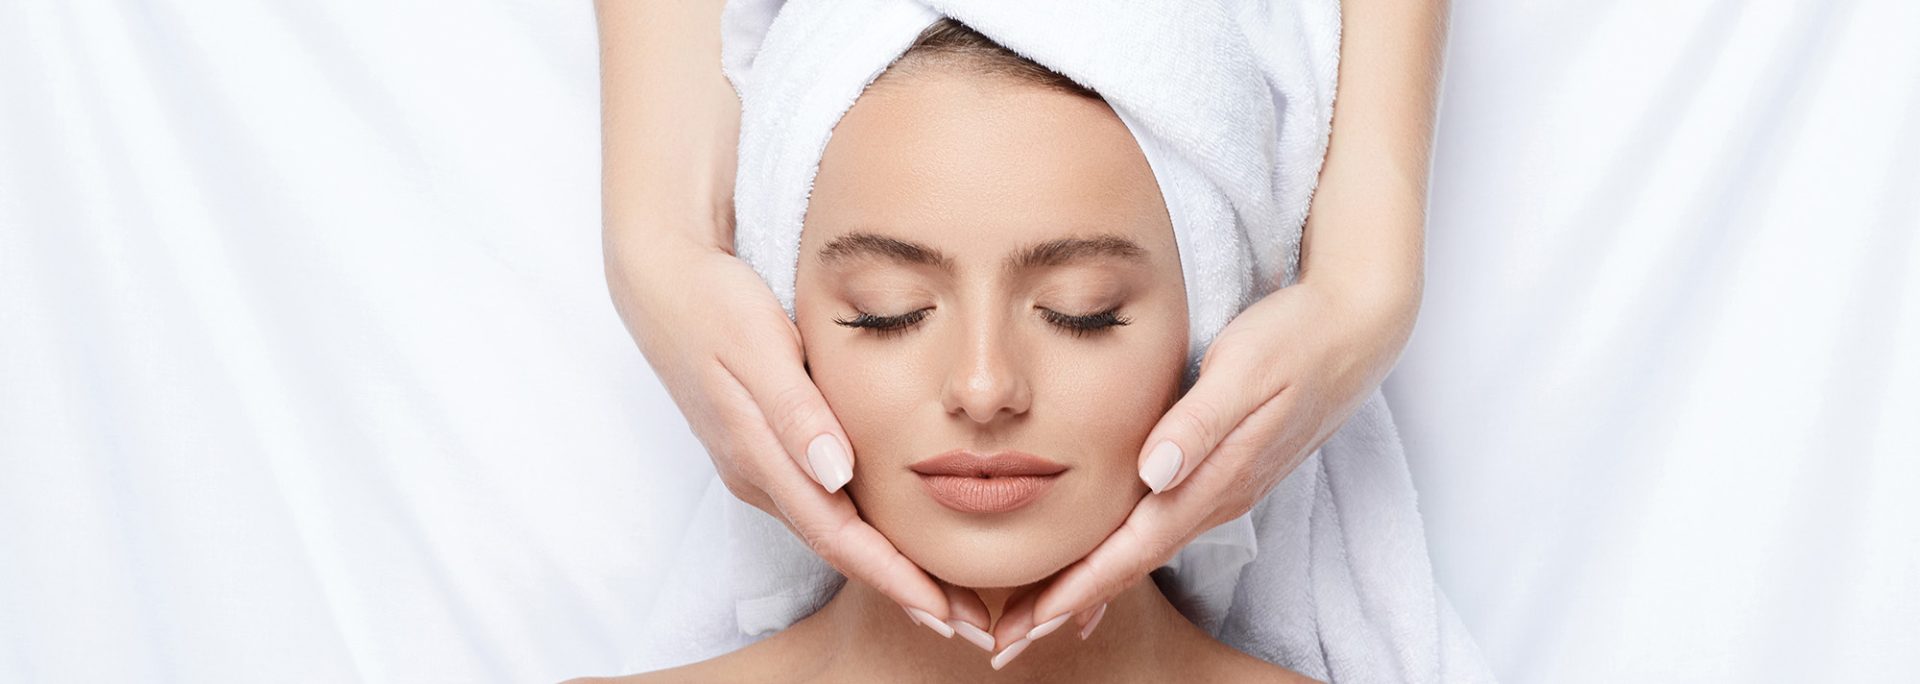 A young girl with thick eyebrows and perfect skin on a white background, a towel on her head, a beauty photo concept, skin care, a spa concept, a treatment, and a facial massage.